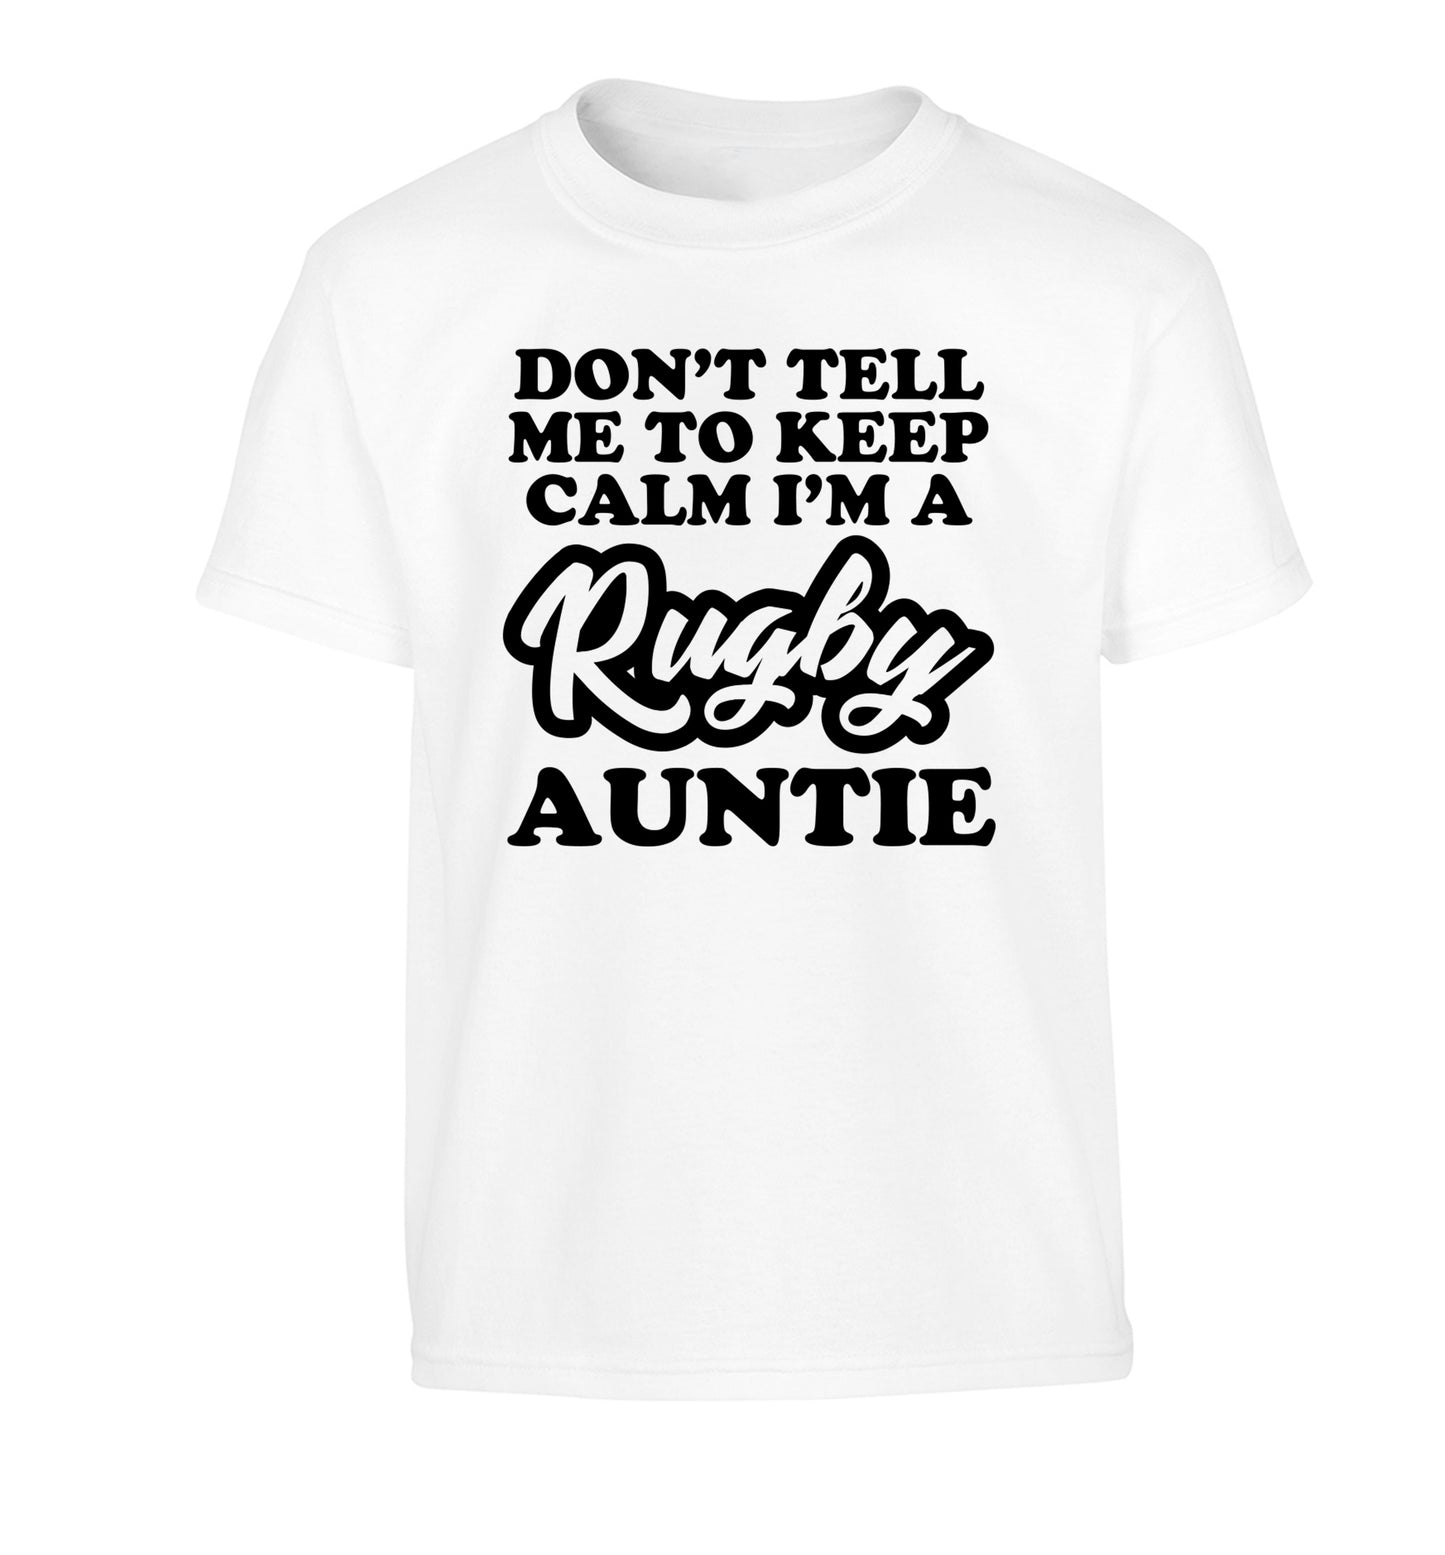 Don't tell me keep calm I'm a rugby auntie Children's white Tshirt 12-13 Years